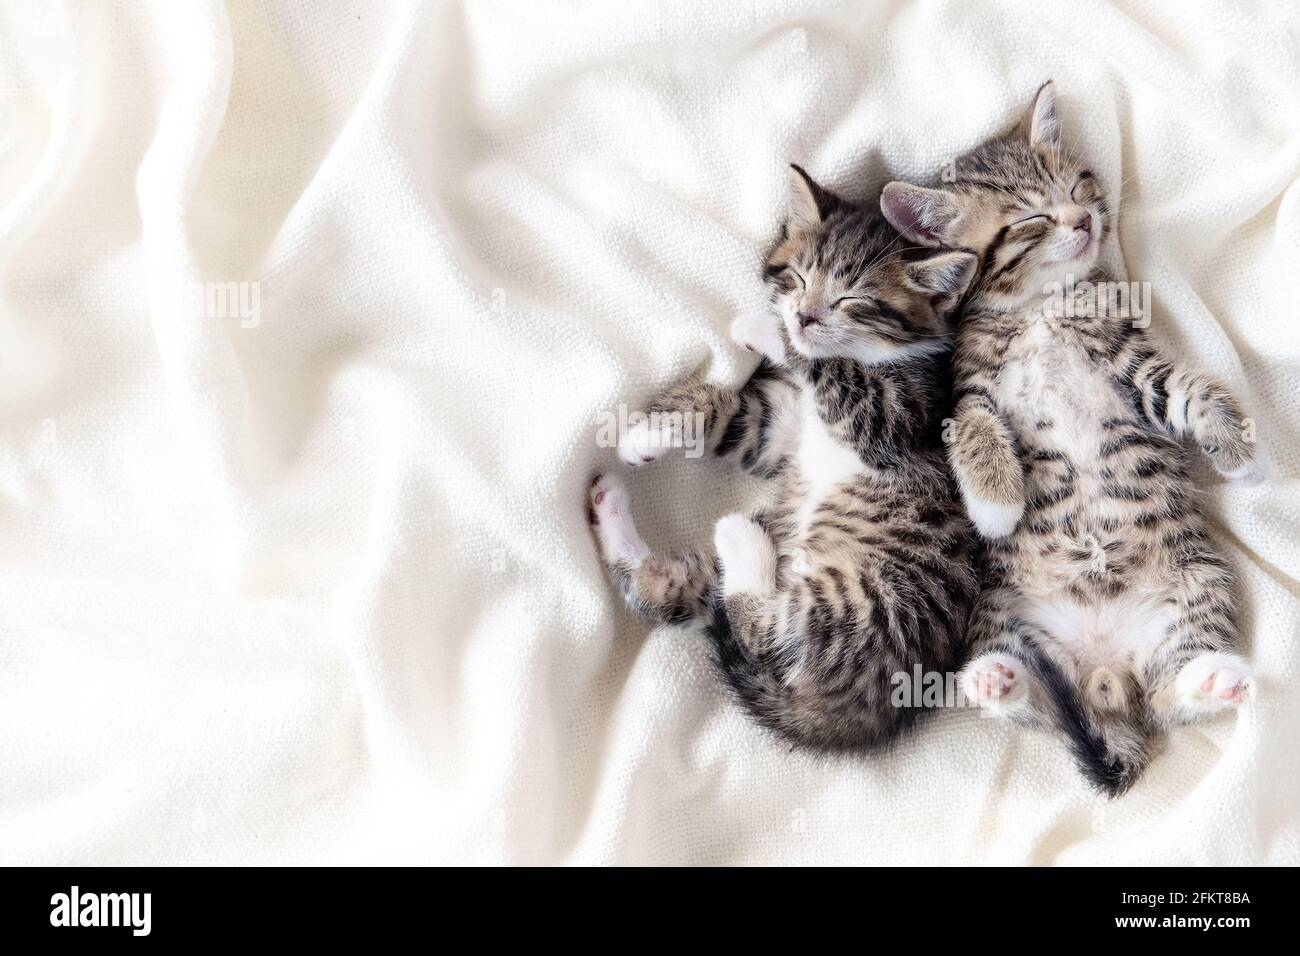 Two small striped domestic kittens sleeping hugging each other at ...